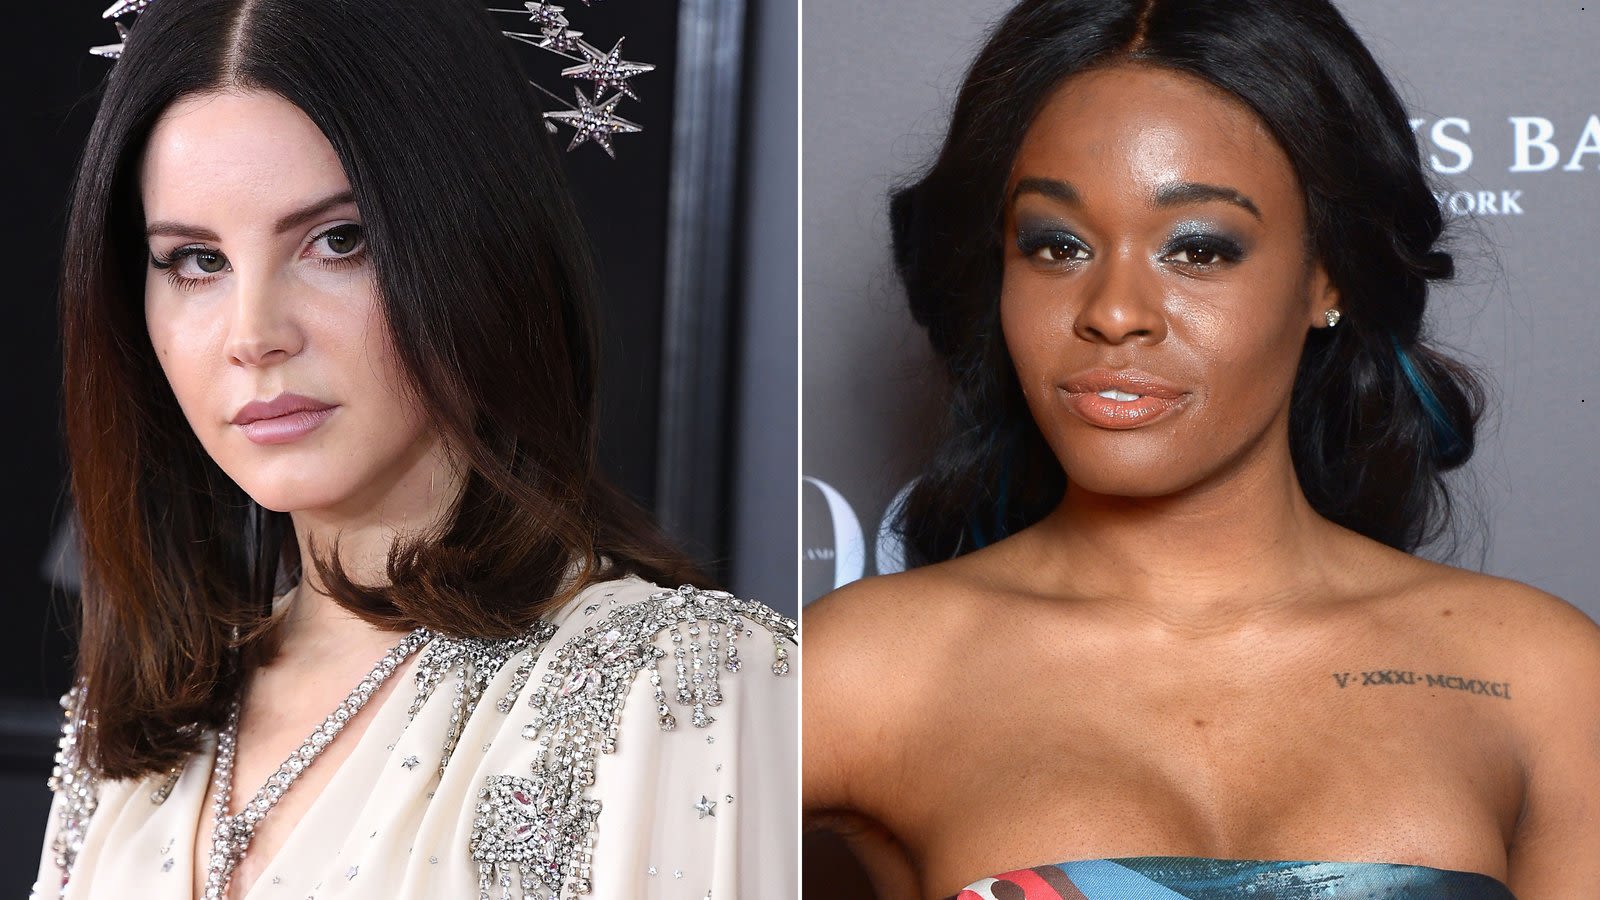 Rose Kelly Nude Sex Video - Azealia Banks and Lana Del Rey's ugly Twitter feud | CNN